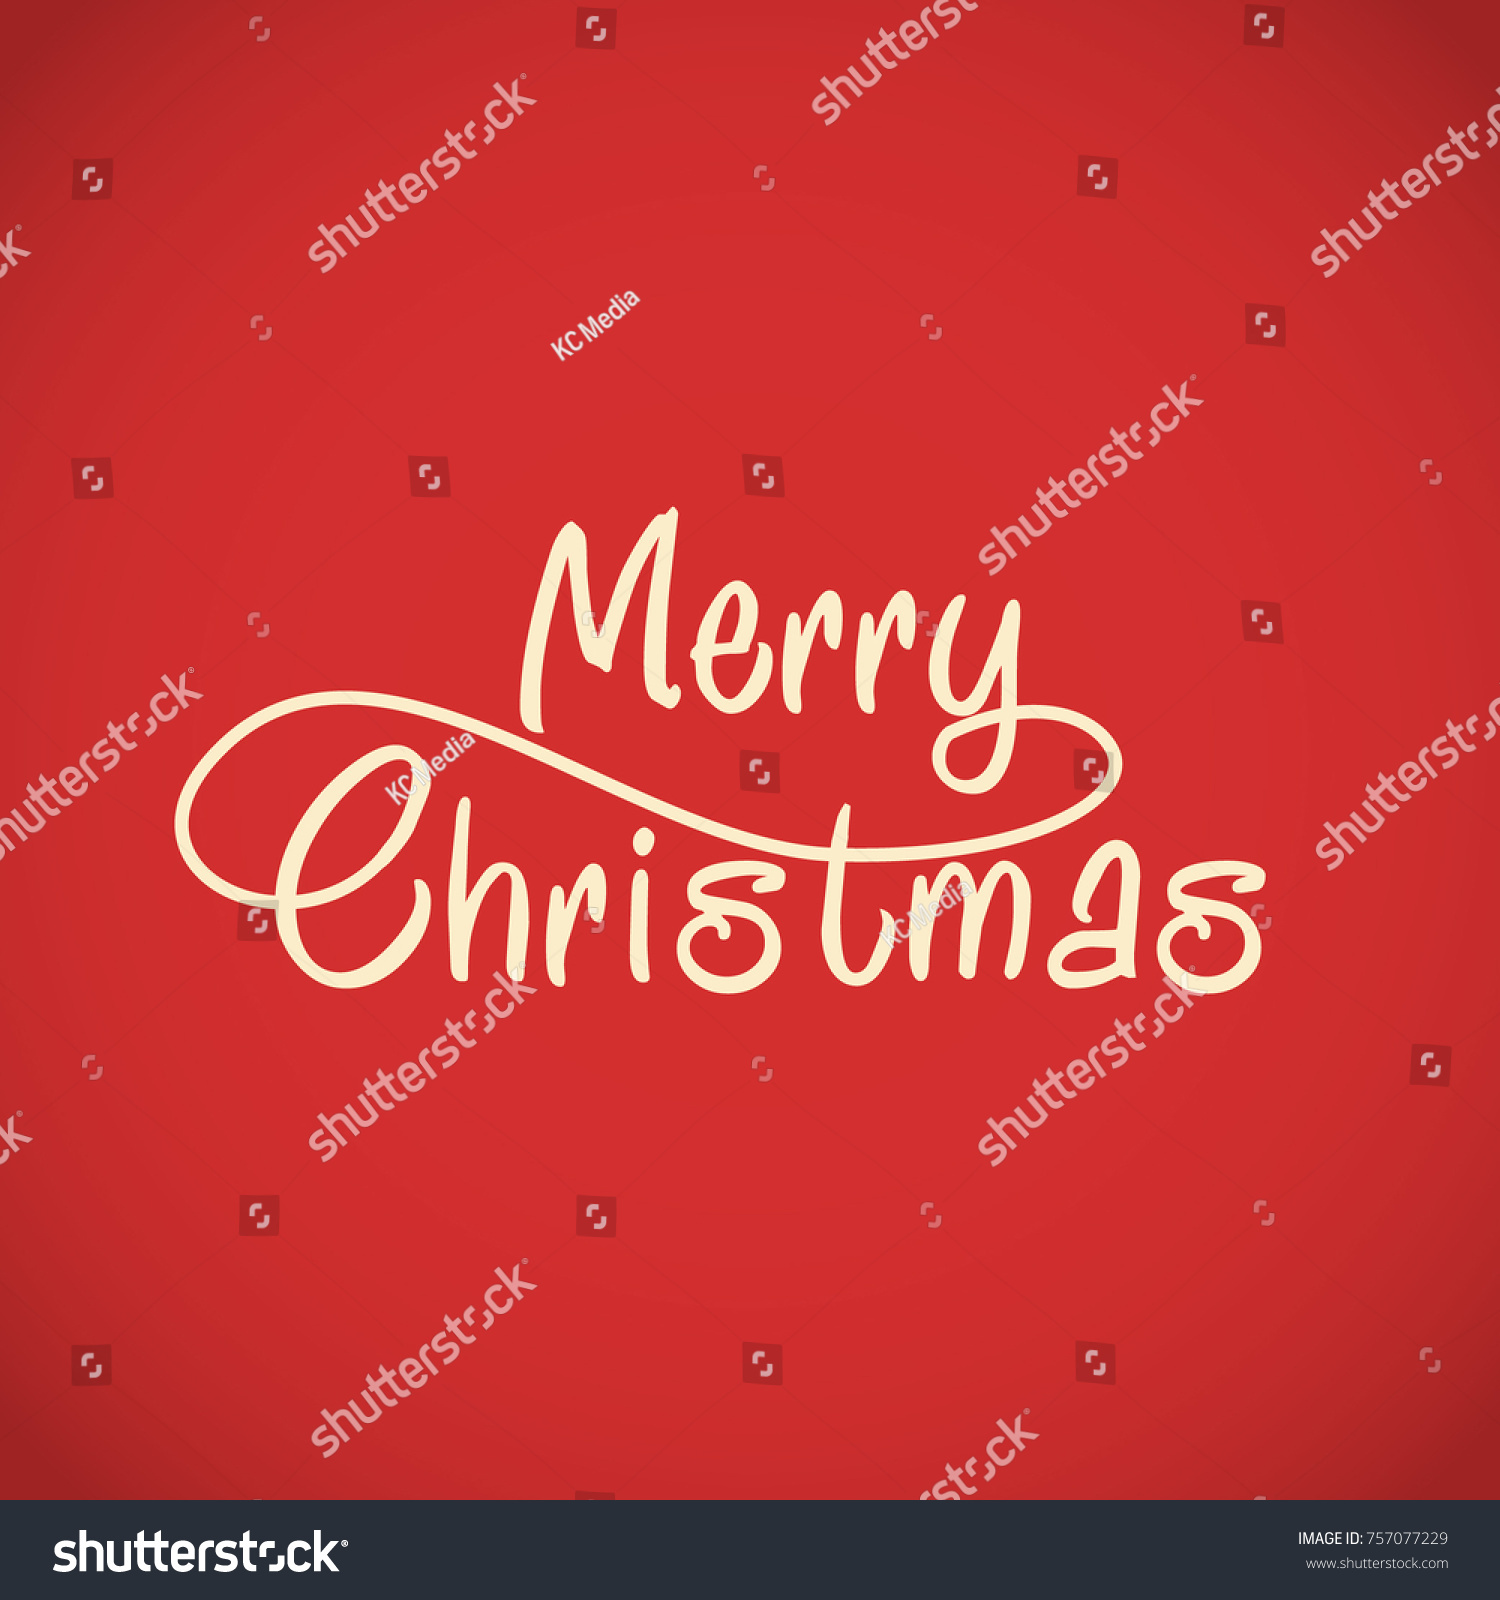 Merry Christmas Vector Poster Greetings Background Stock Vector ...